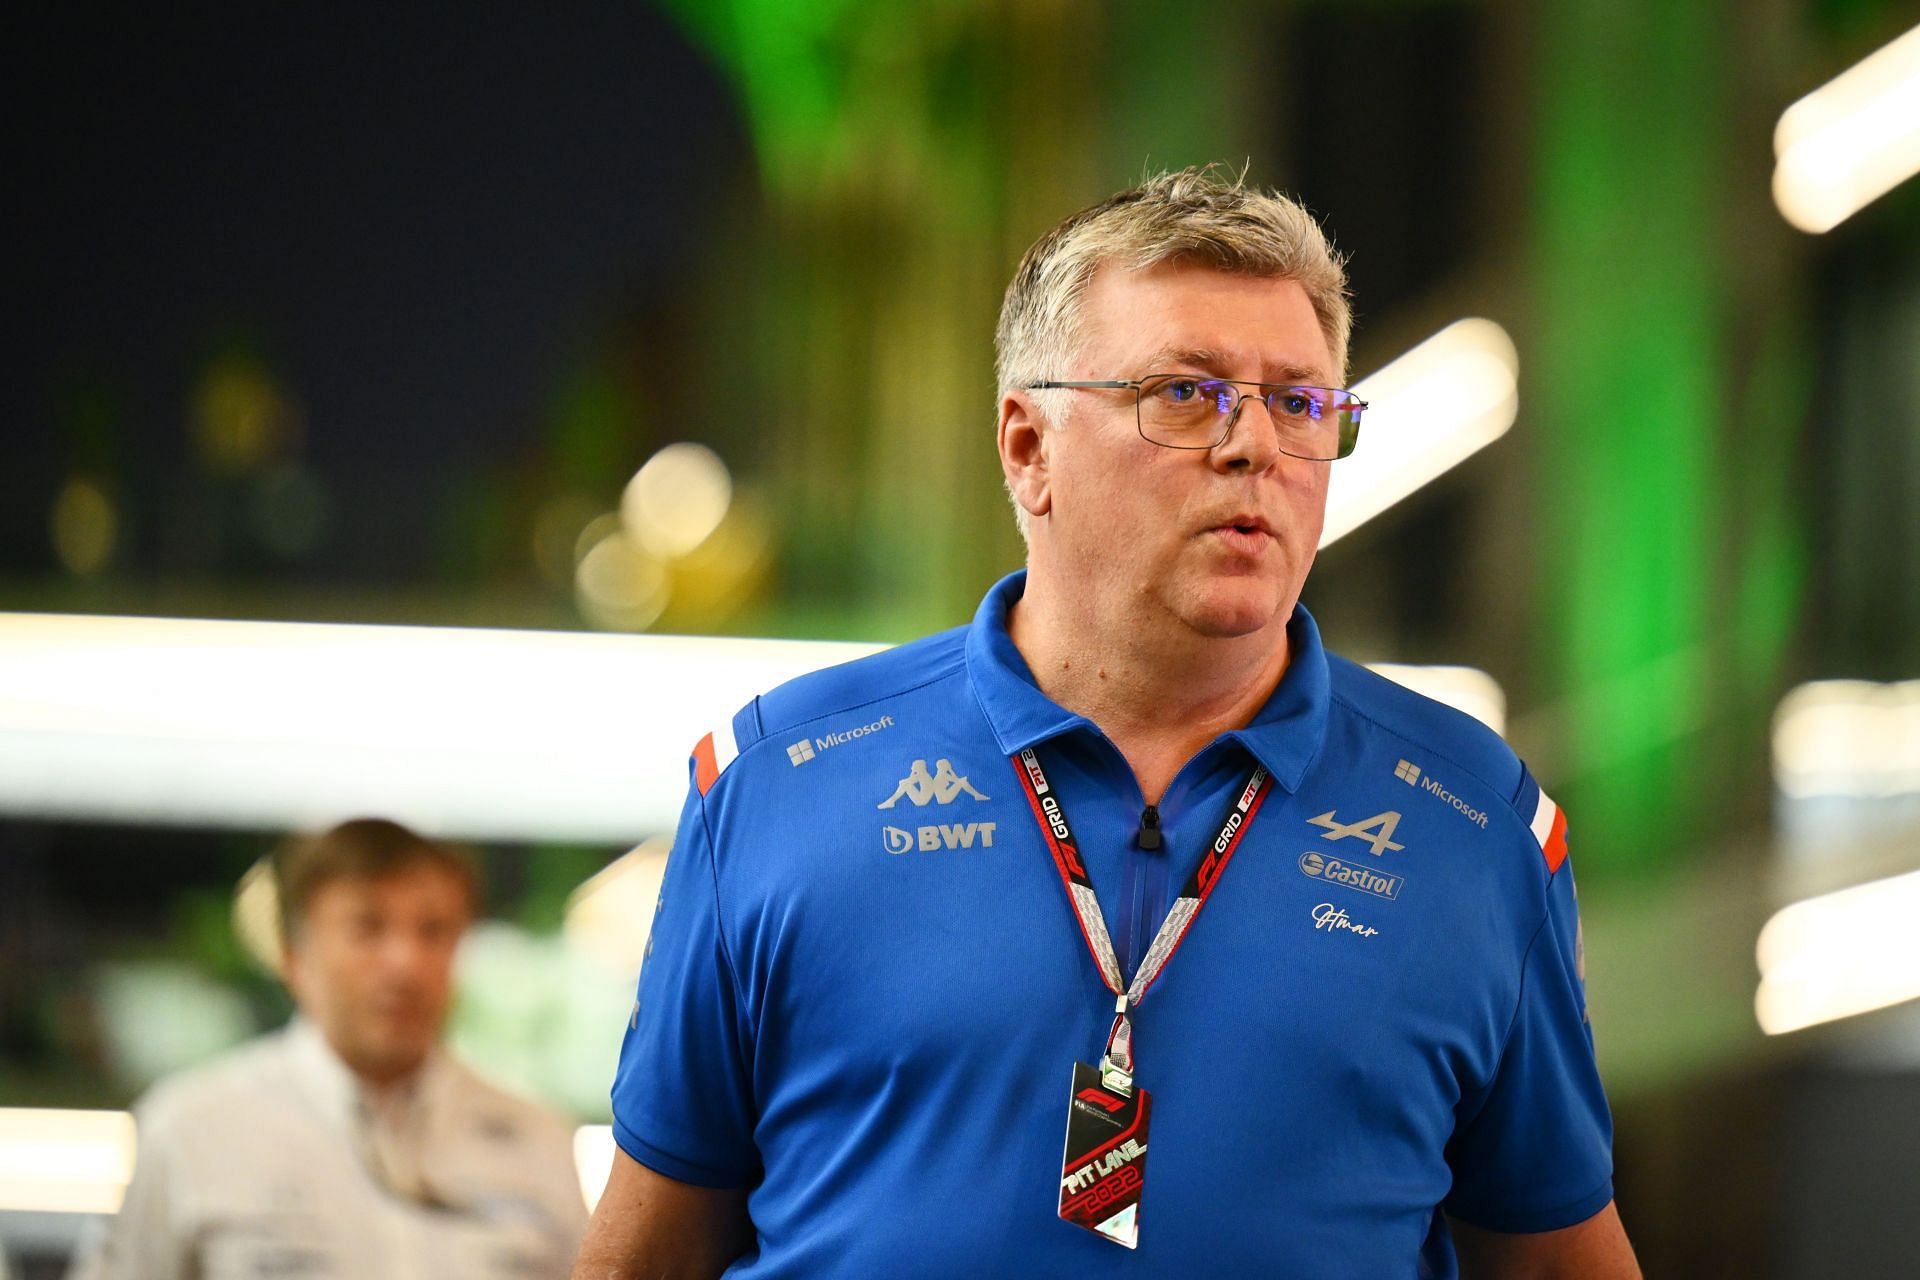 Otmar Szafnauer feels the movement of Red Bull employees could have been directly responsible for a Red Bull replica ending up on the grid in Barcelona